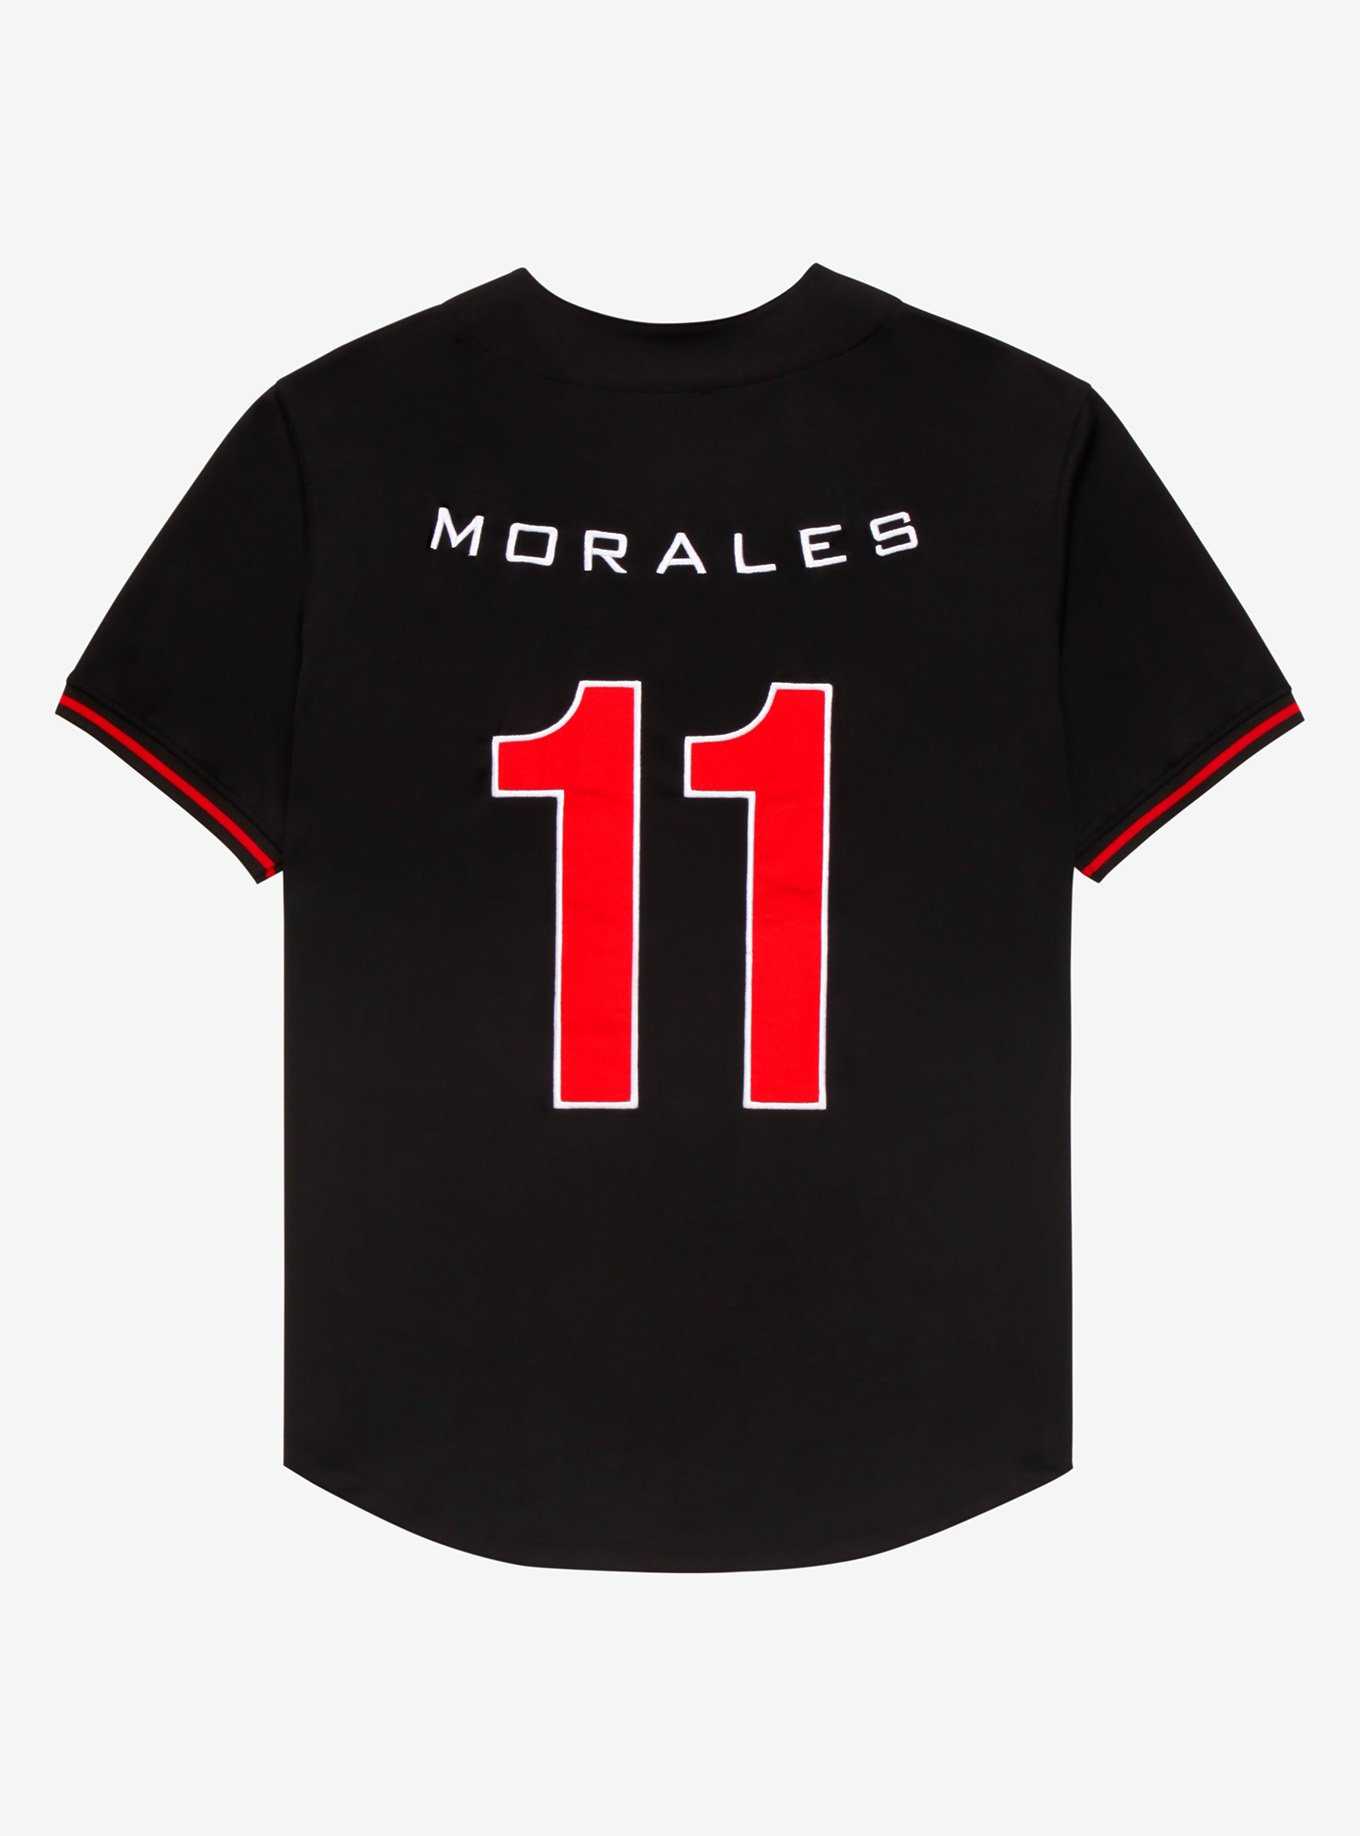 Marvel Spider-Man Miles Morales Baseball Jersey - BoxLunch Exclusive, , hi-res